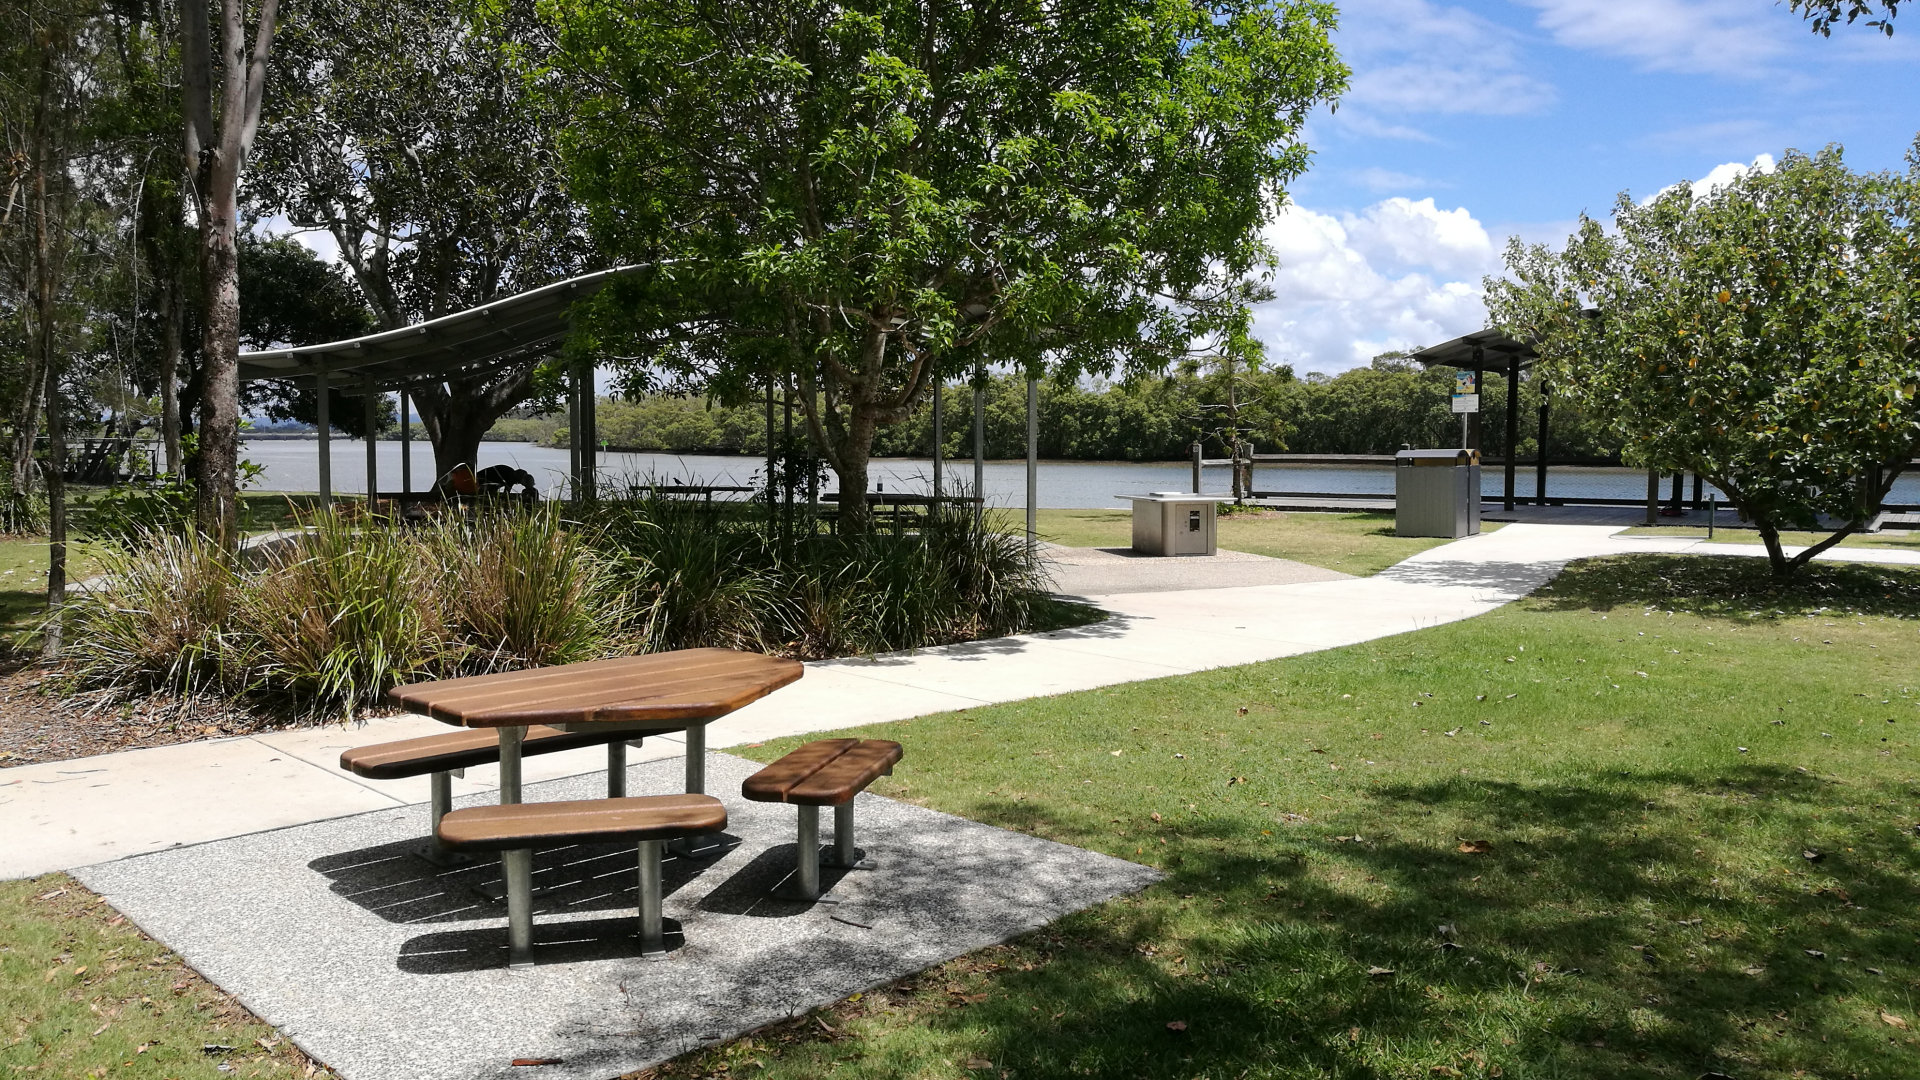 Park area at Tinchi Tamba Wetlands with picnic tables, BBQ, and the North Pine River in the background. Tinchi Tamba is named after the Aboriginal words for ibis and mangroves